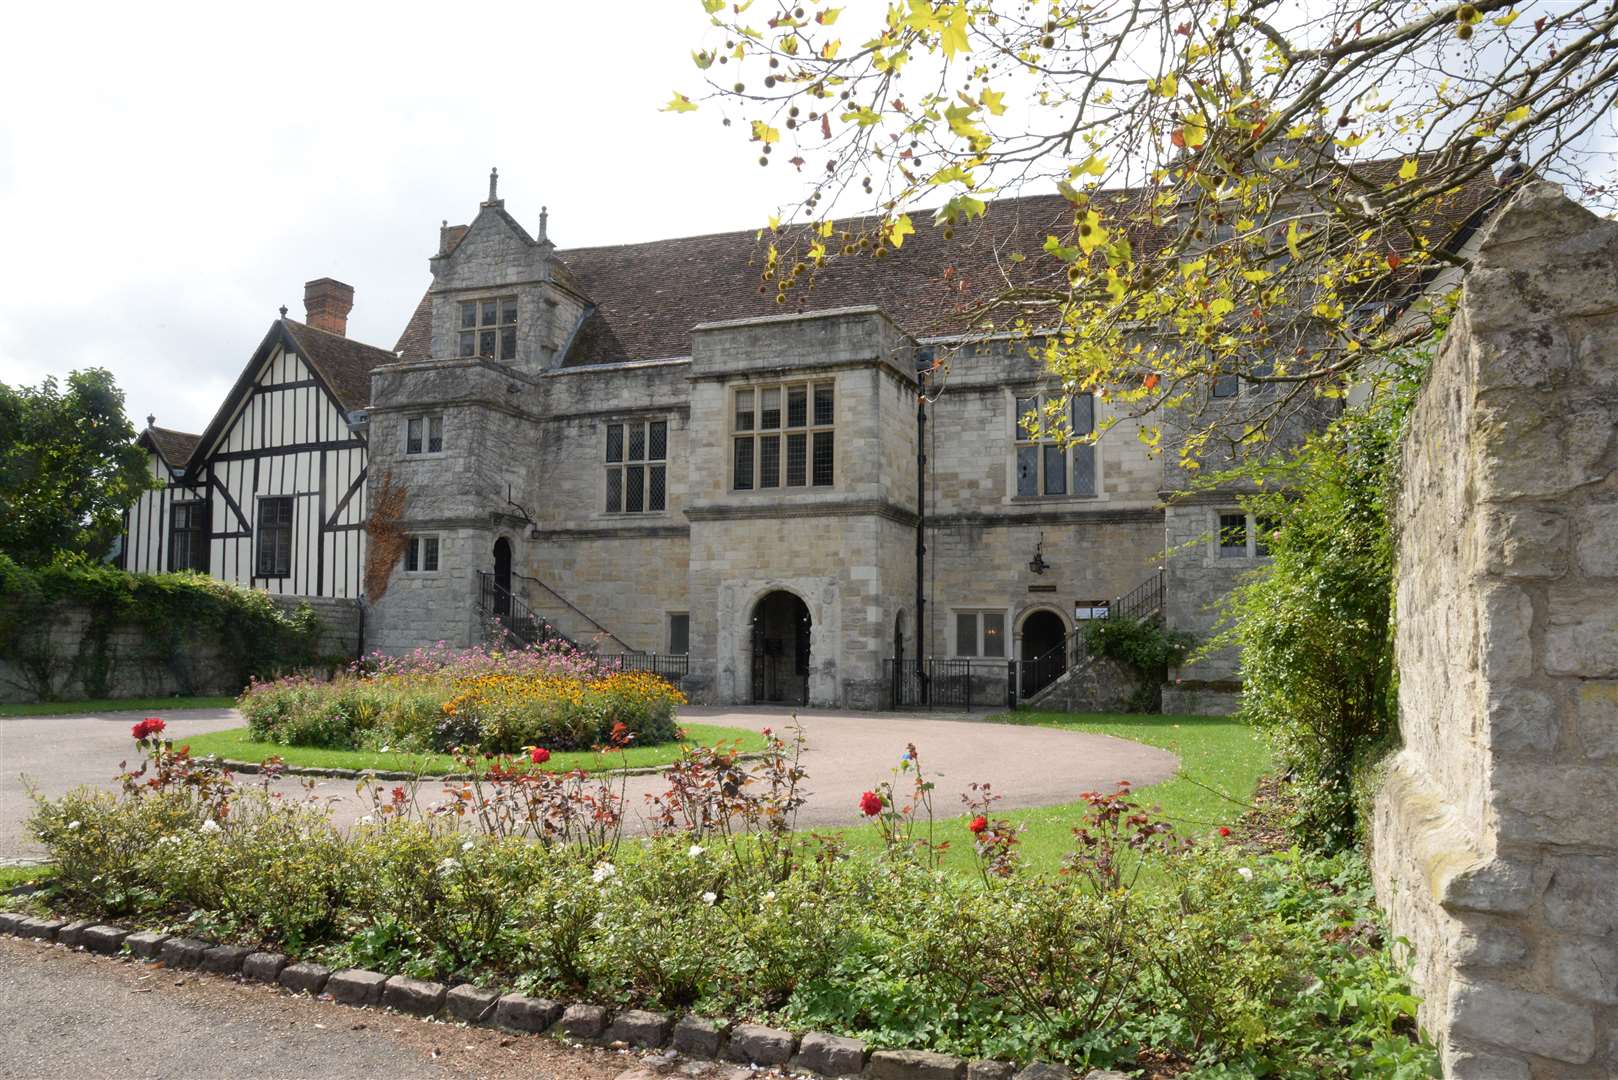 The Archbishops Palace in Mill Street, Maidstone